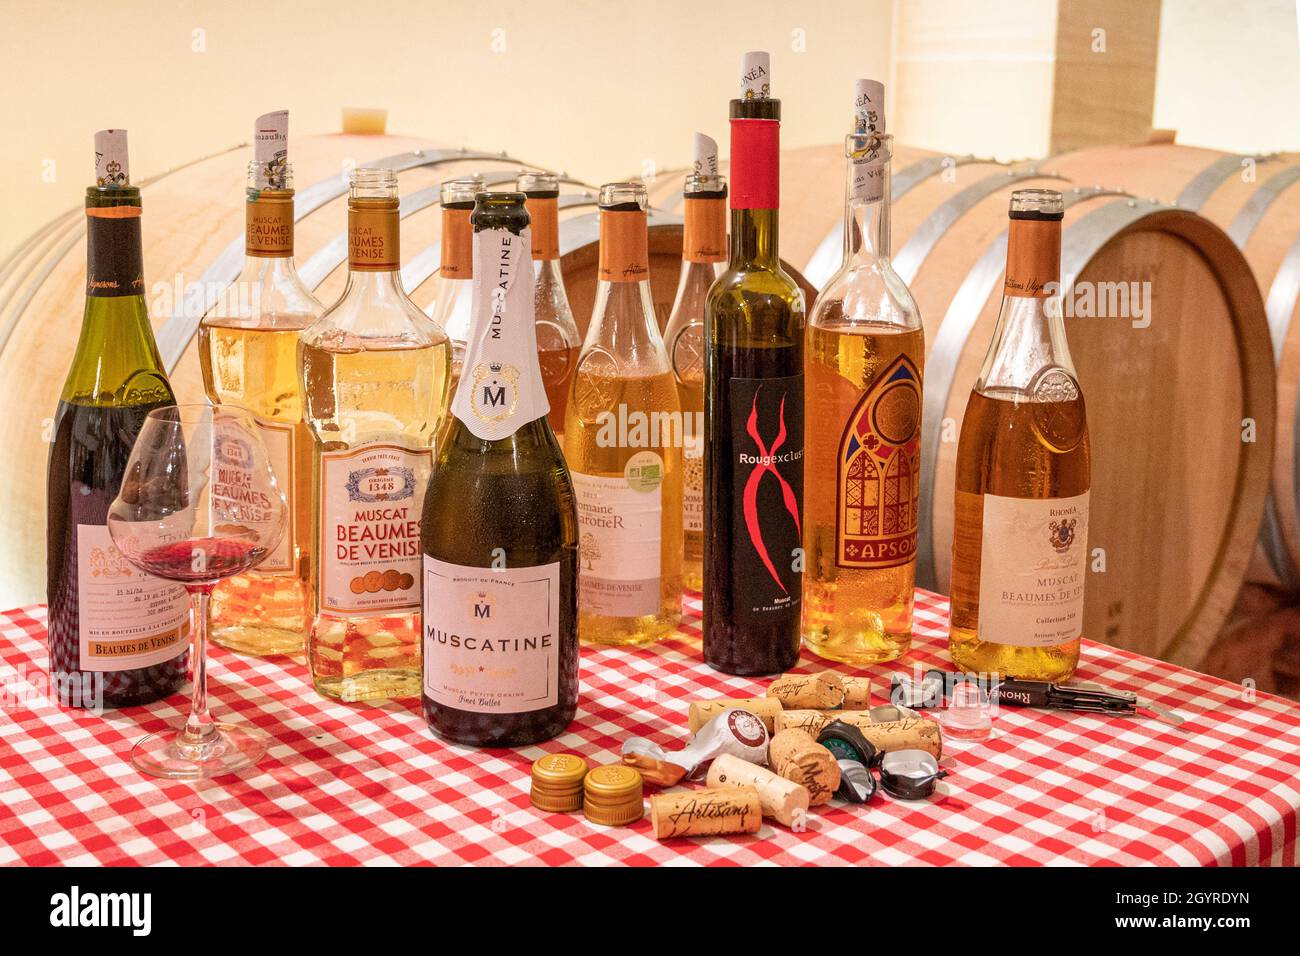 A selection of wines produced by the co-operative Rhonéa at Baumes-de-Vénise, France Stock Photo